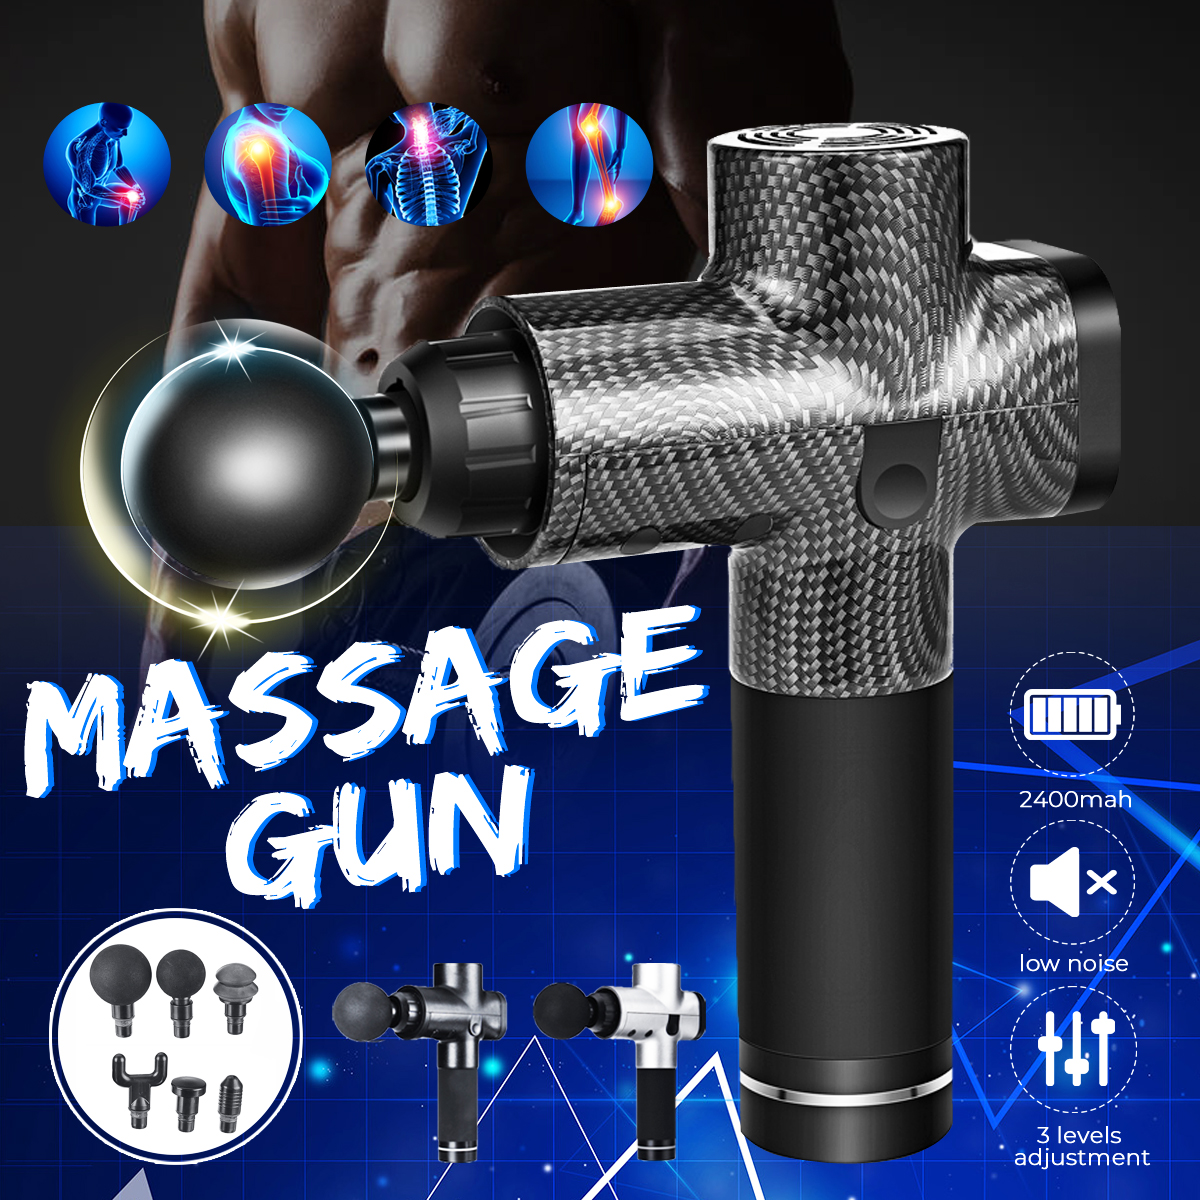 2400mAh-Electric-Percussion-Massager-3-Speeds-Low-Noise-Vibration-Muscle-Therapy-Device-with-6-Massa-1550390-1